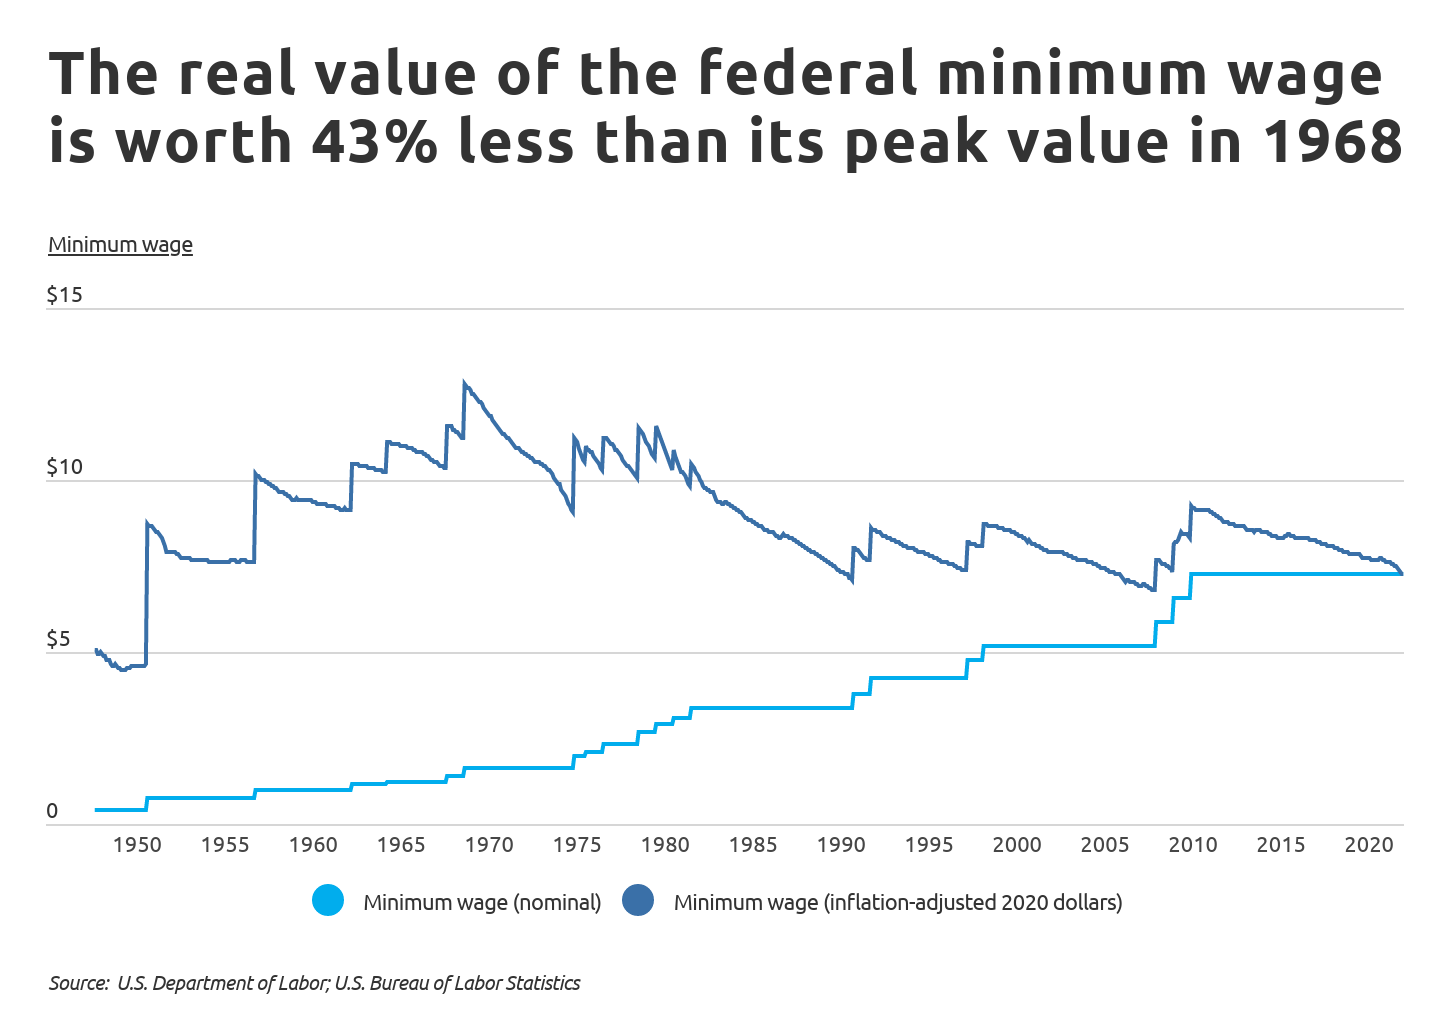 The real value of the federal minimum wage is worth 43 less than in 1968